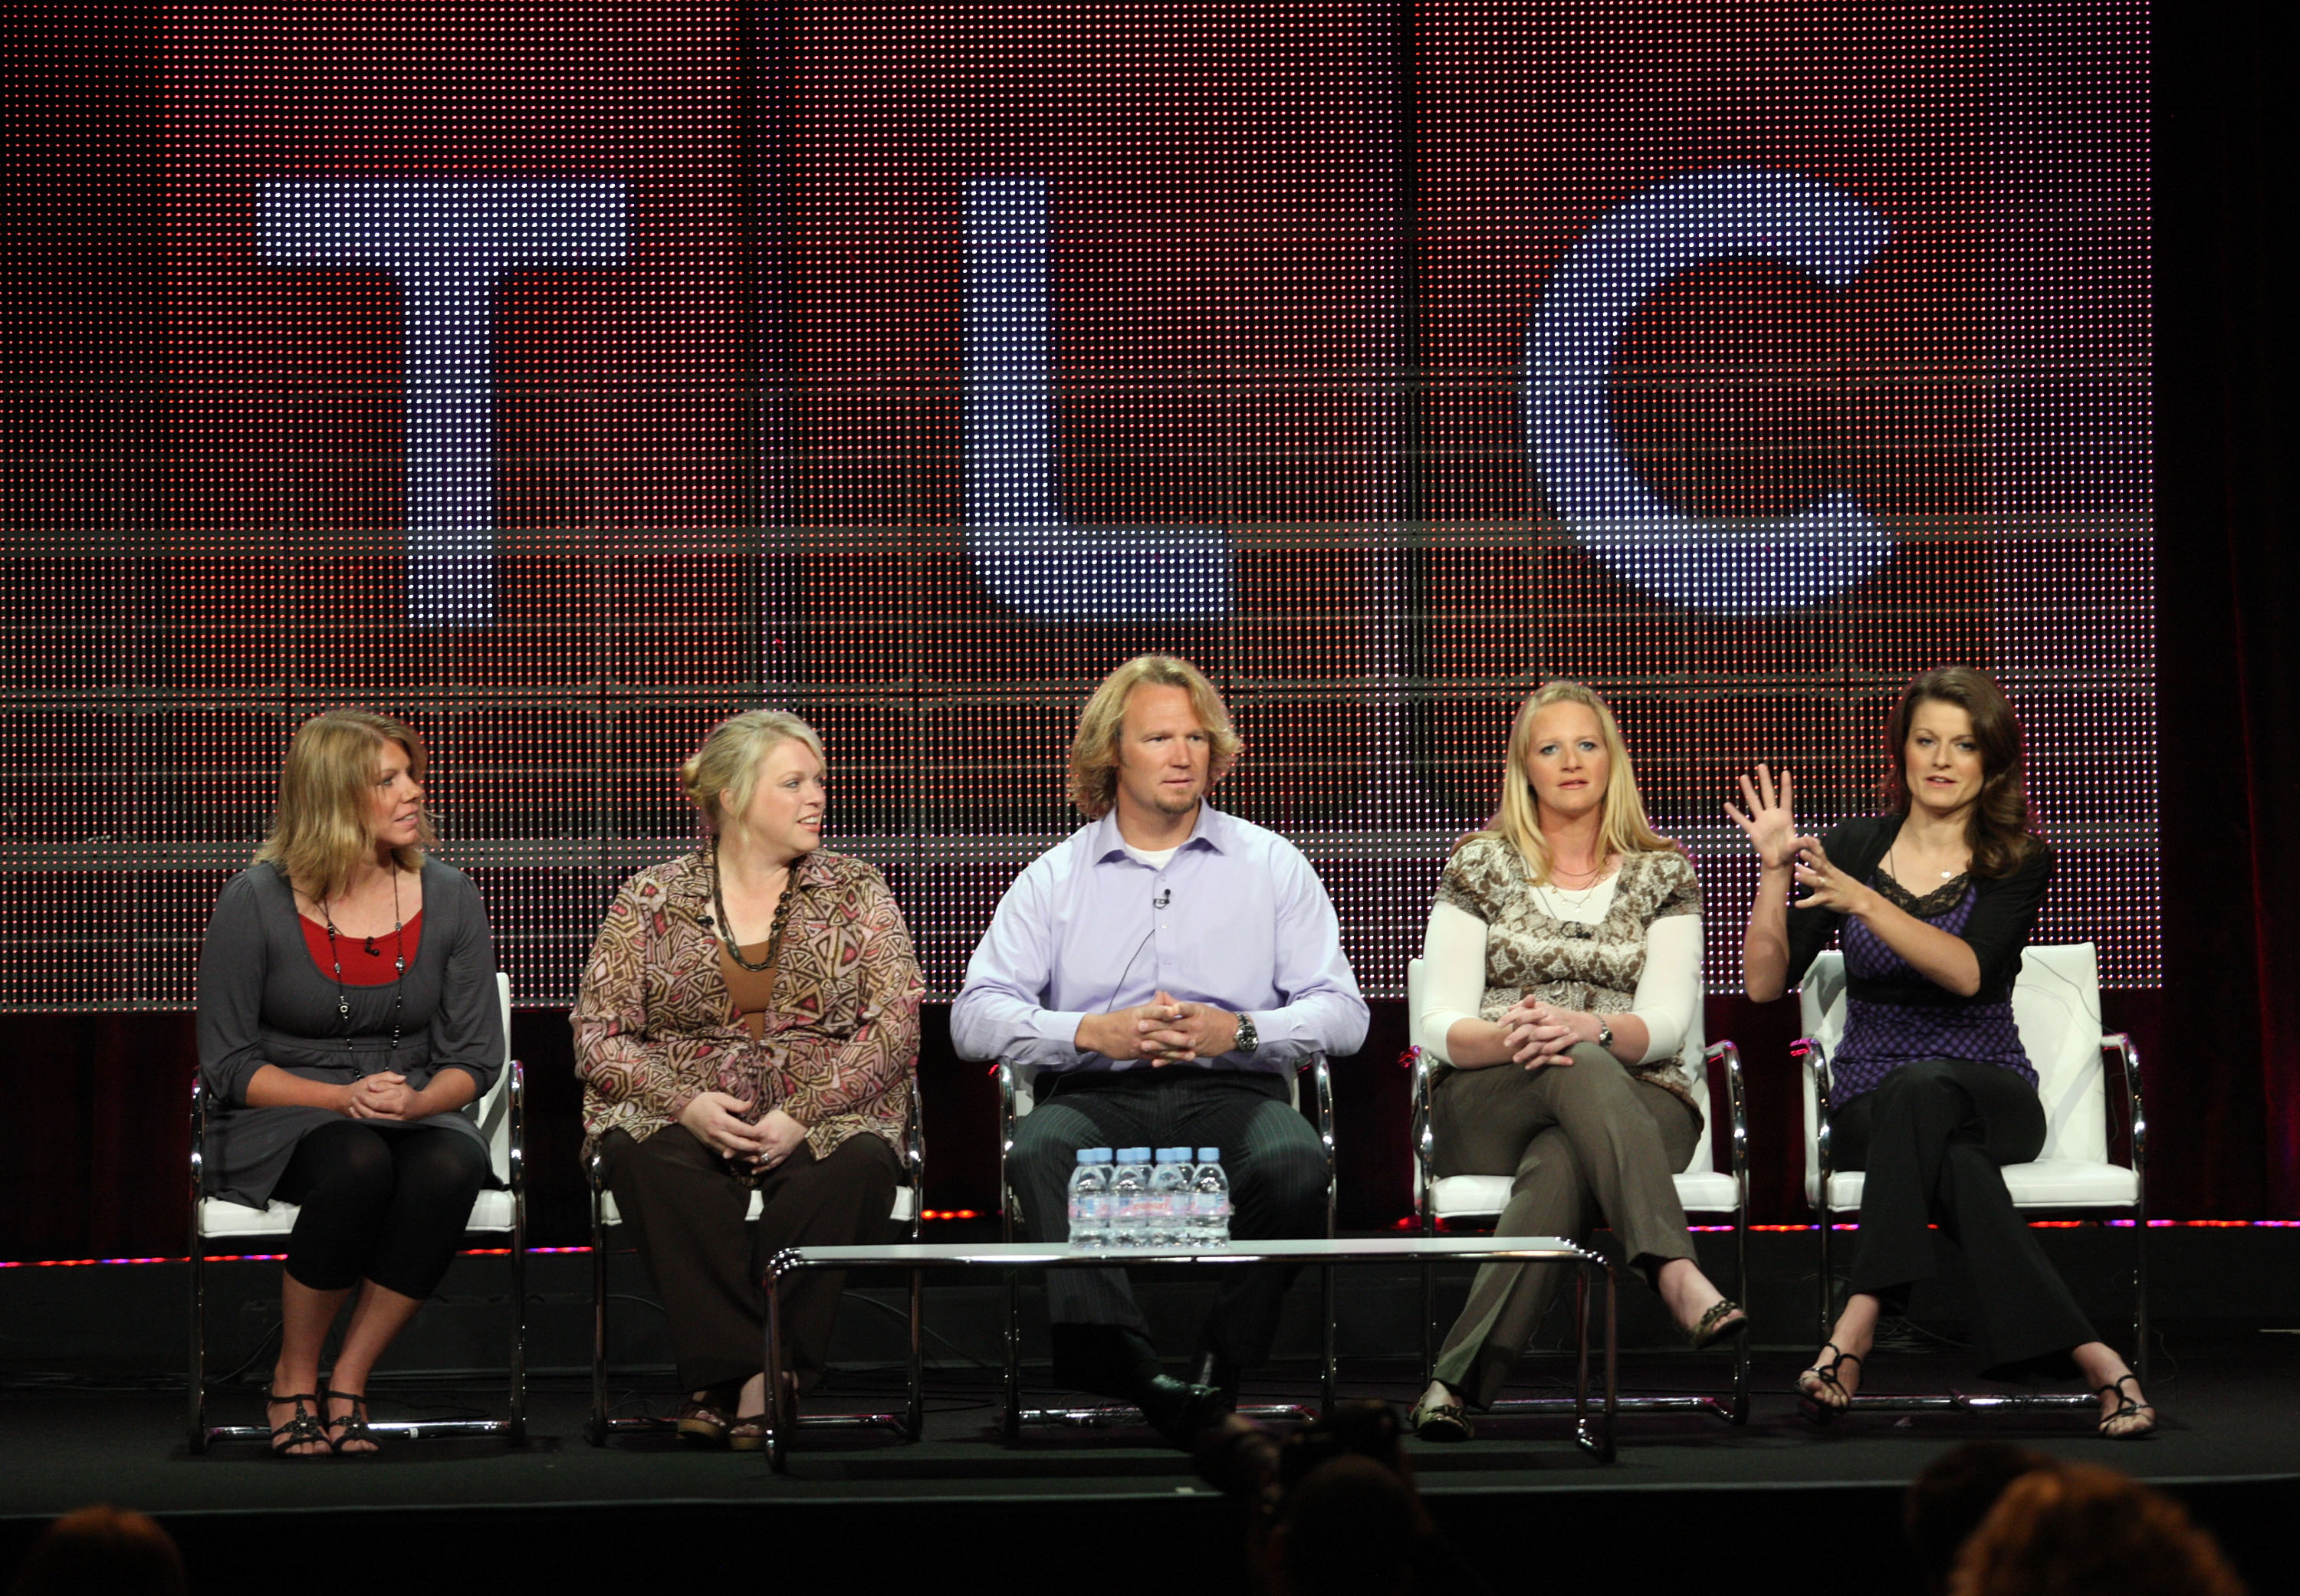 Meri Brown, Janelle Brown, Kody Brown, Christine Brown and Robyn Brown sit on stage at the 2010 Summer TCA Press Tour. Season 16 of Sister Wives will premiere in November 2021